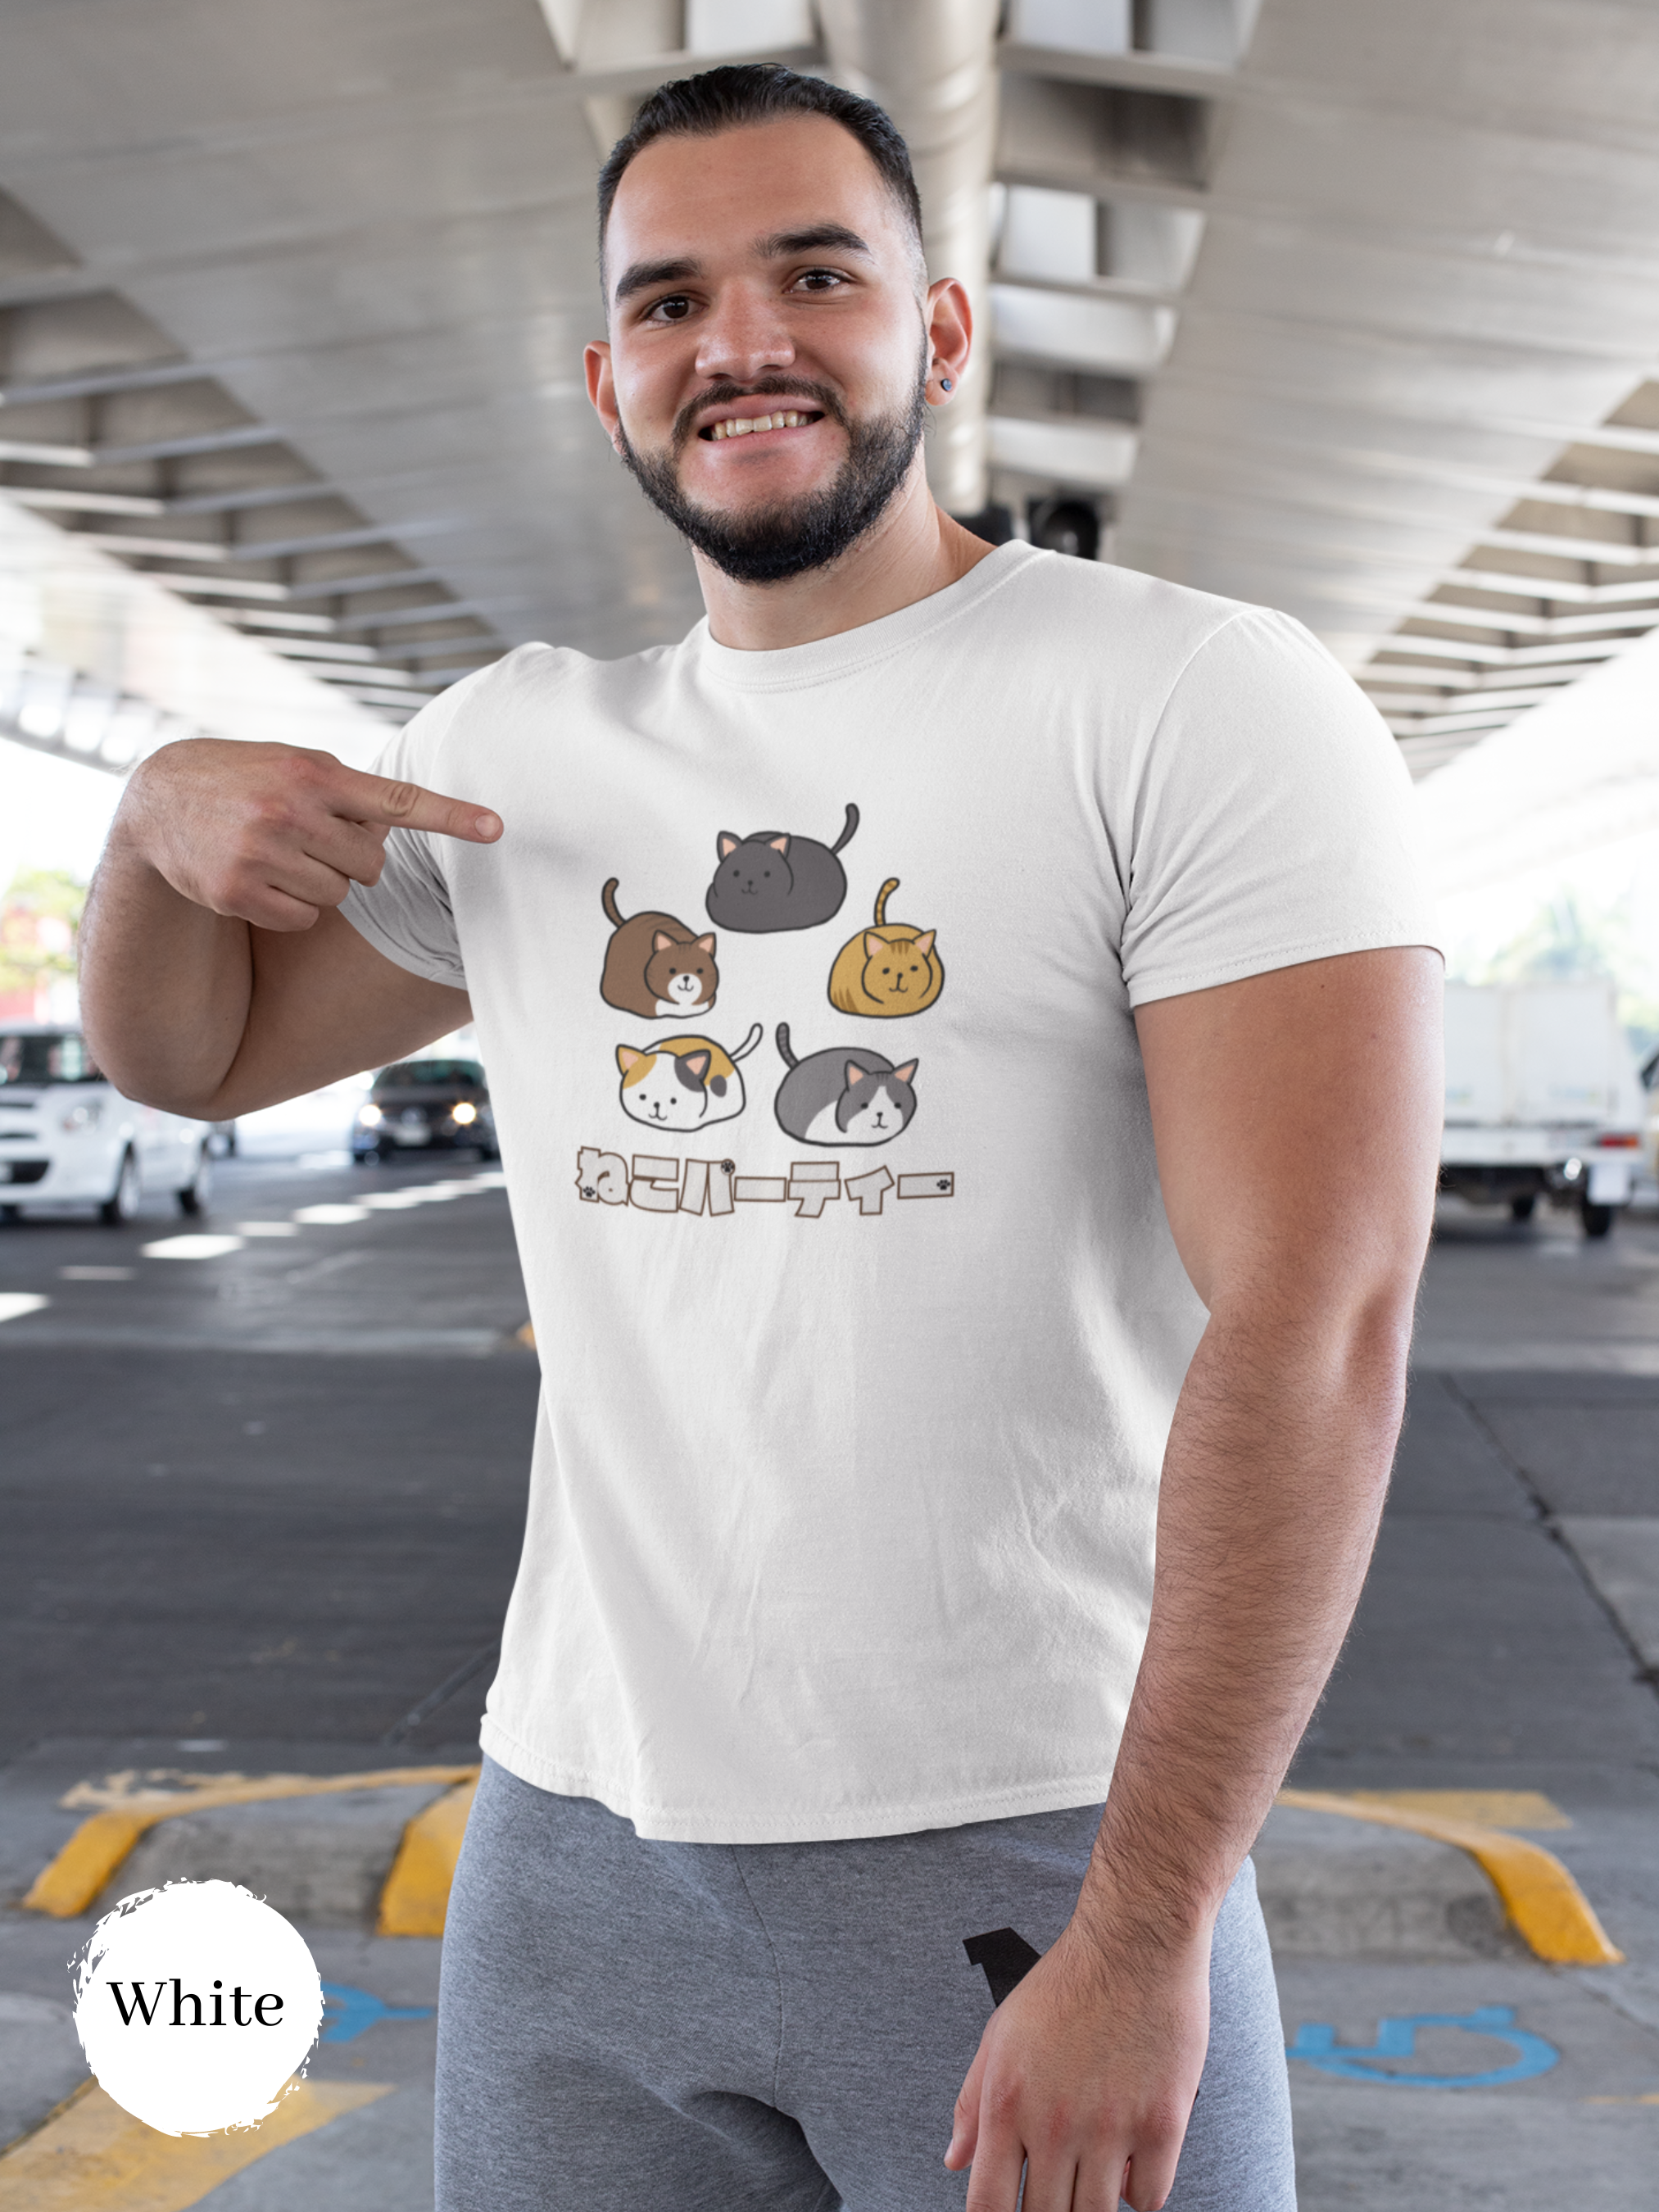 Cat T-shirt: "Neko Party" - Japanese-inspired Cat Art Print Tee for Cat Lovers and Fans of Unique Japanese Shirts